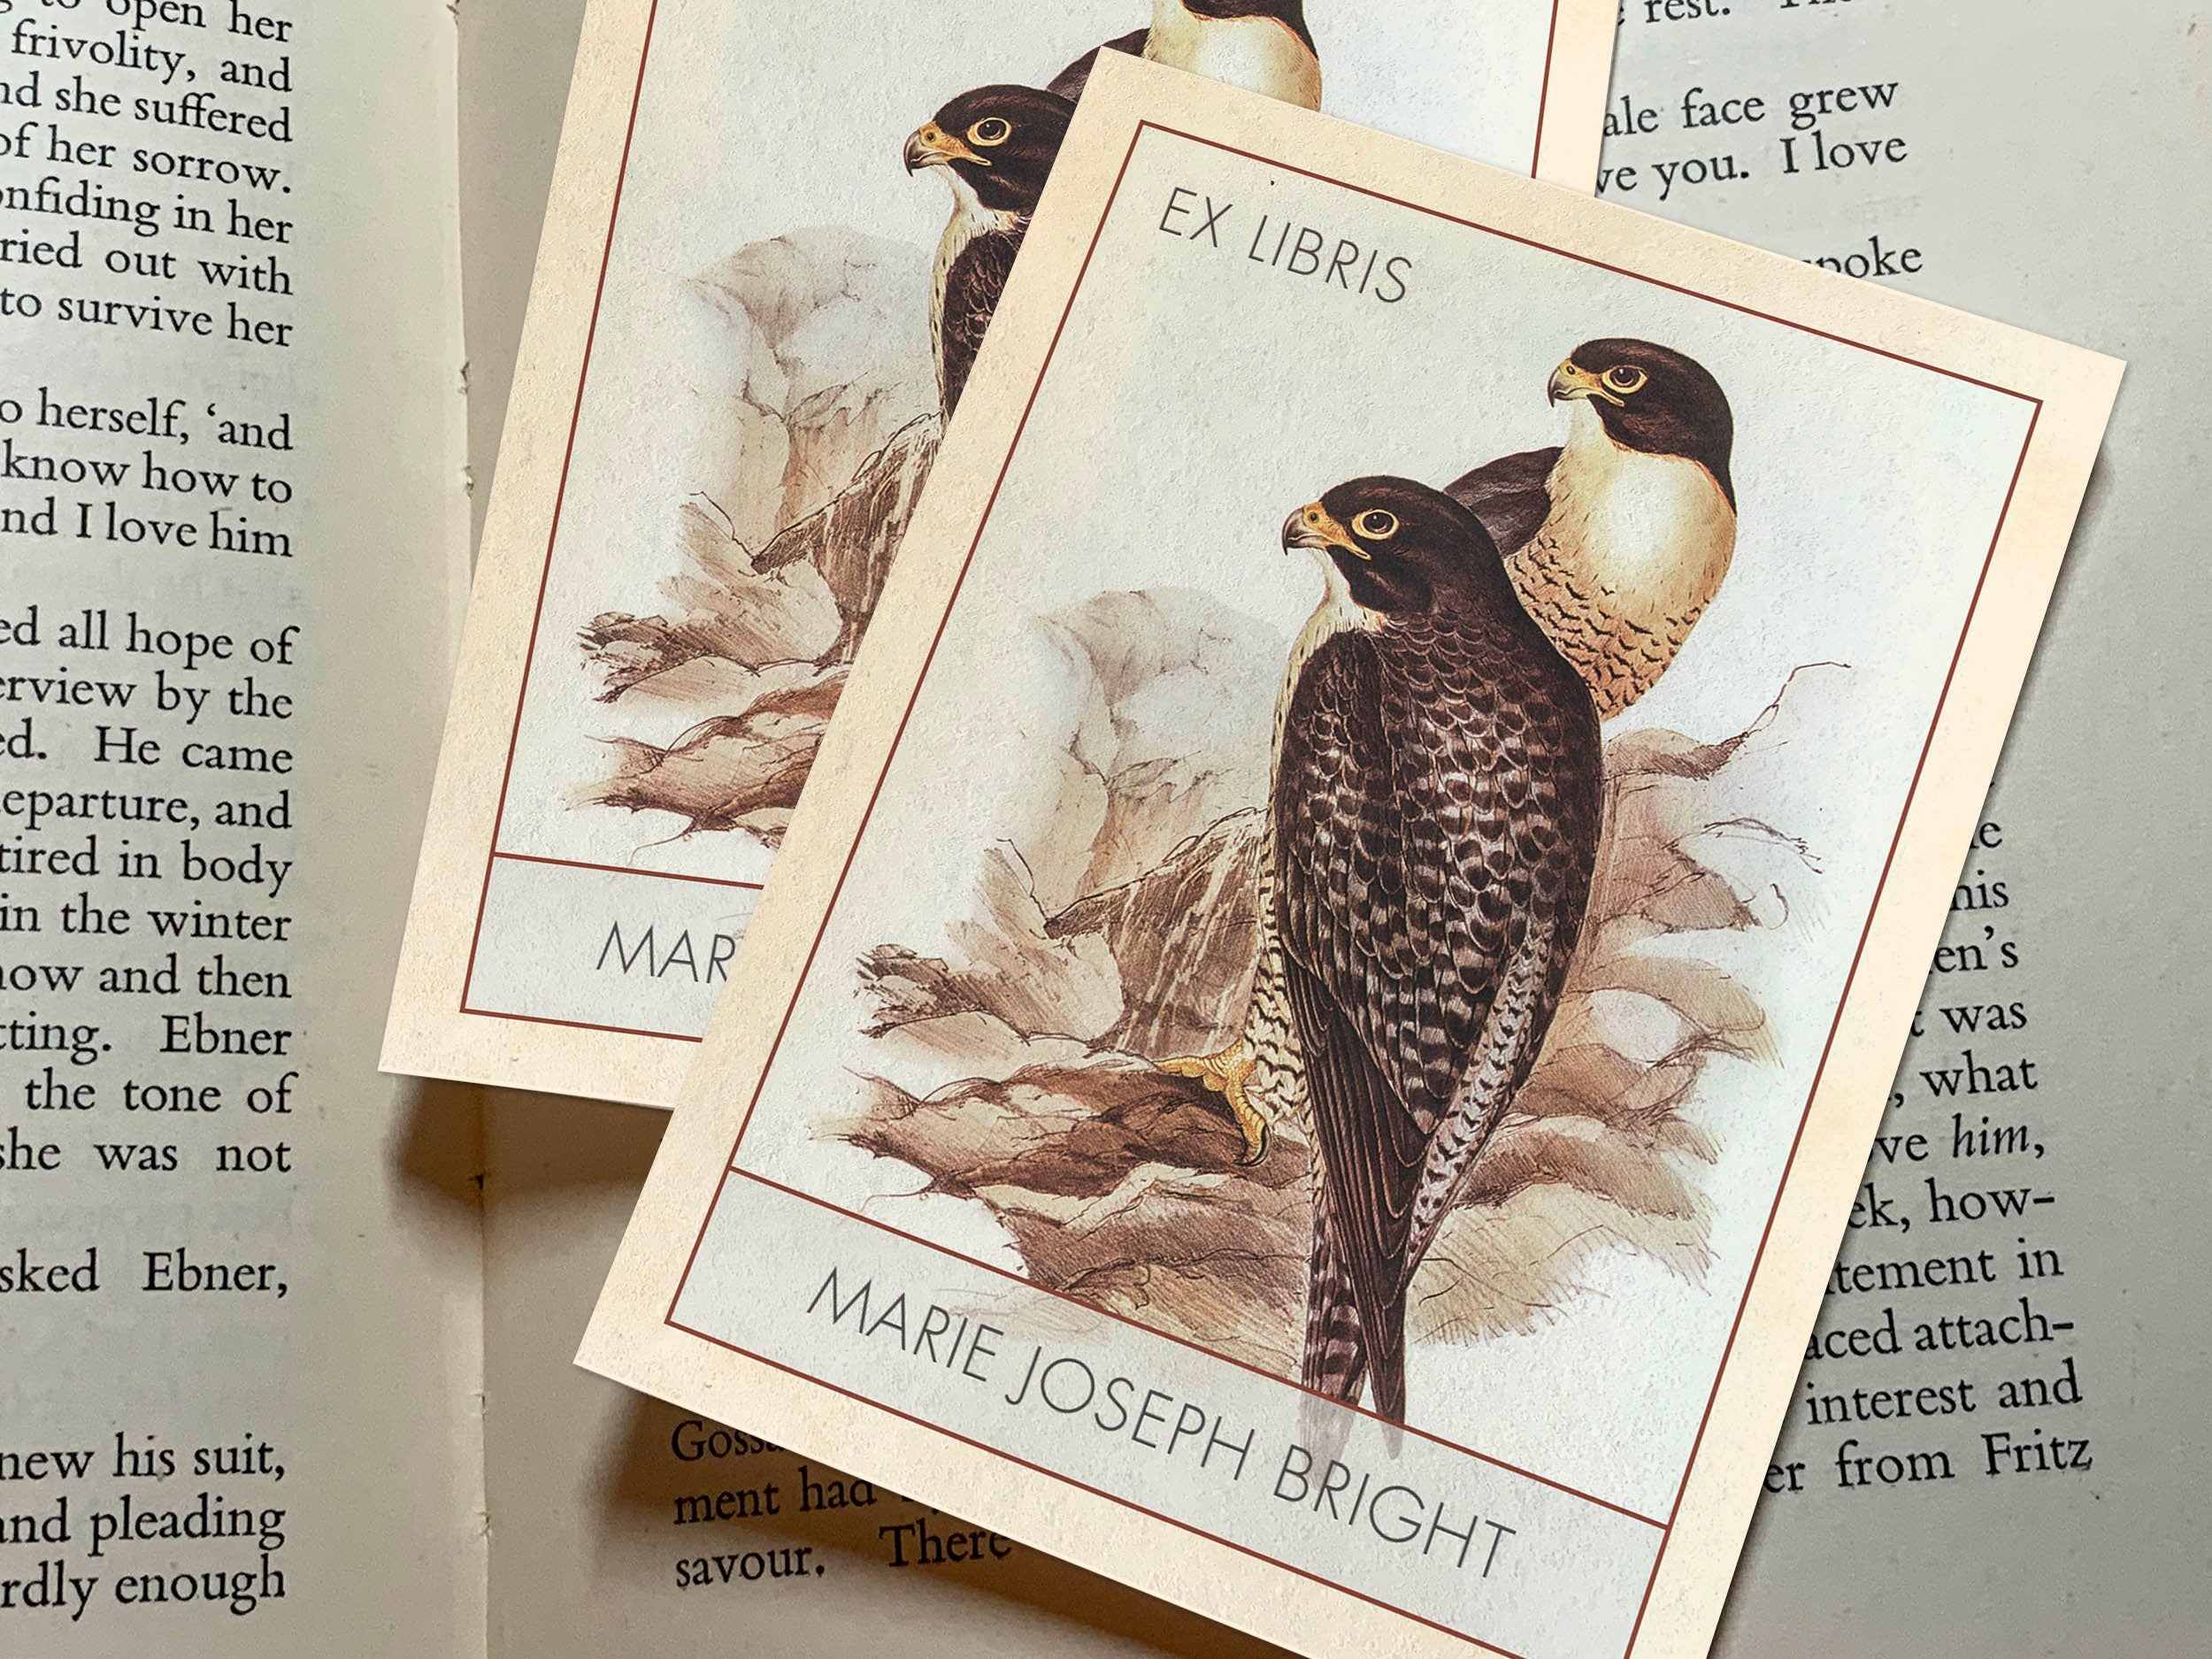 Avian Visions by John Gould, Personalized, Bird Ex Libris Bookplates, Crafted on Traditional Gummed Paper, 32 Styles, 3in x 4in, Set of 30